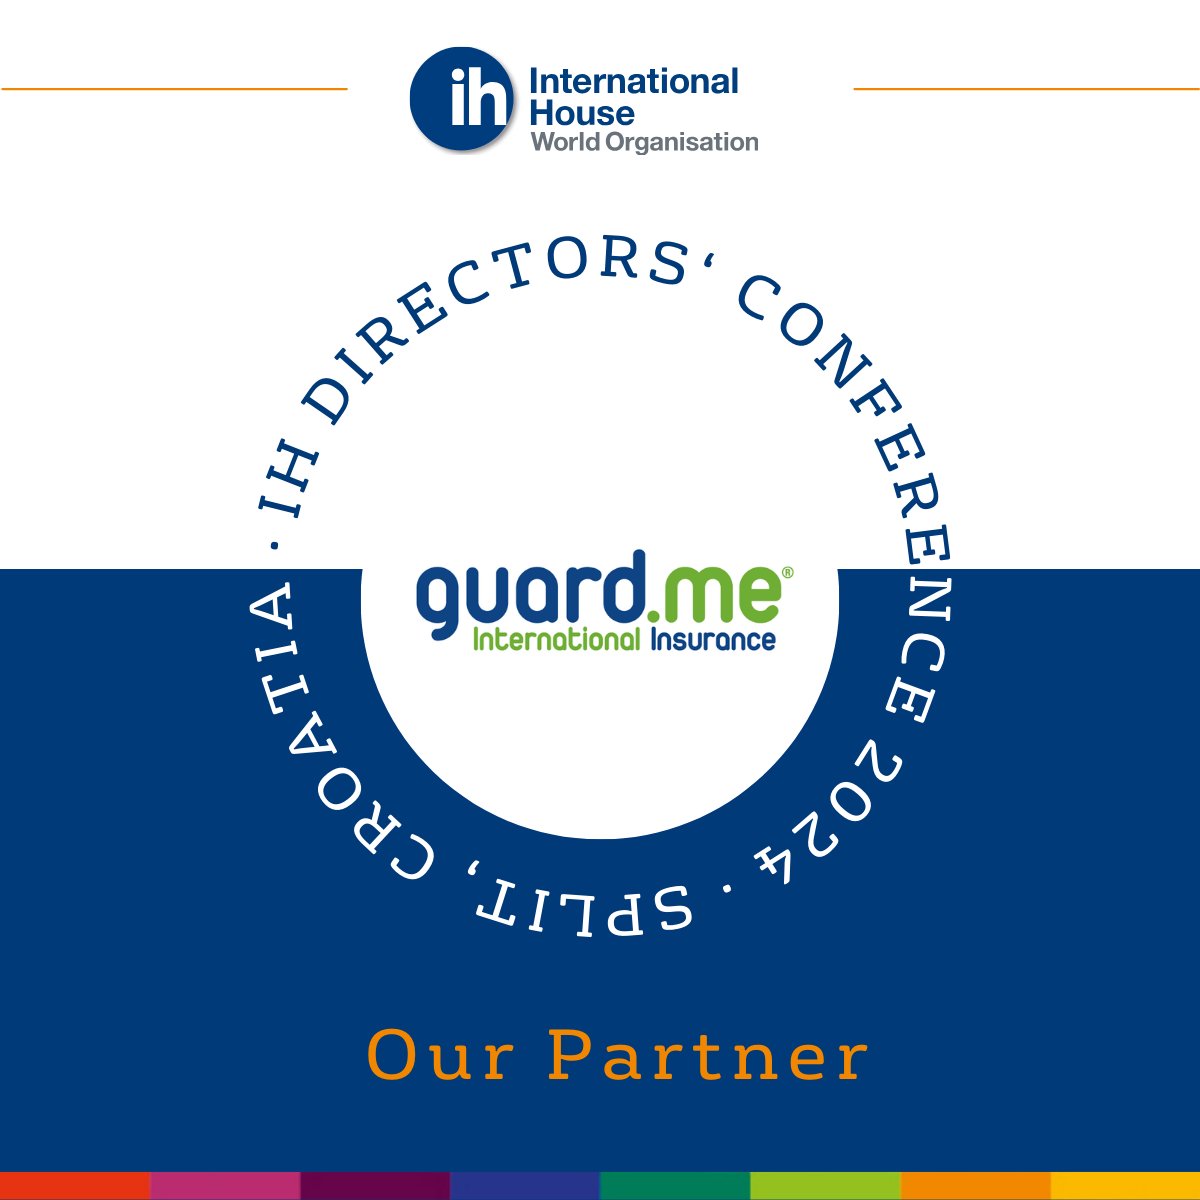 Thank you to our longstanding Partner, @GuardmeIns

Explore their products and services here 👇guardme.eu 

#IHDirConf2024 #ihworld #InternationalHouse #IHNetwork #IHEvents